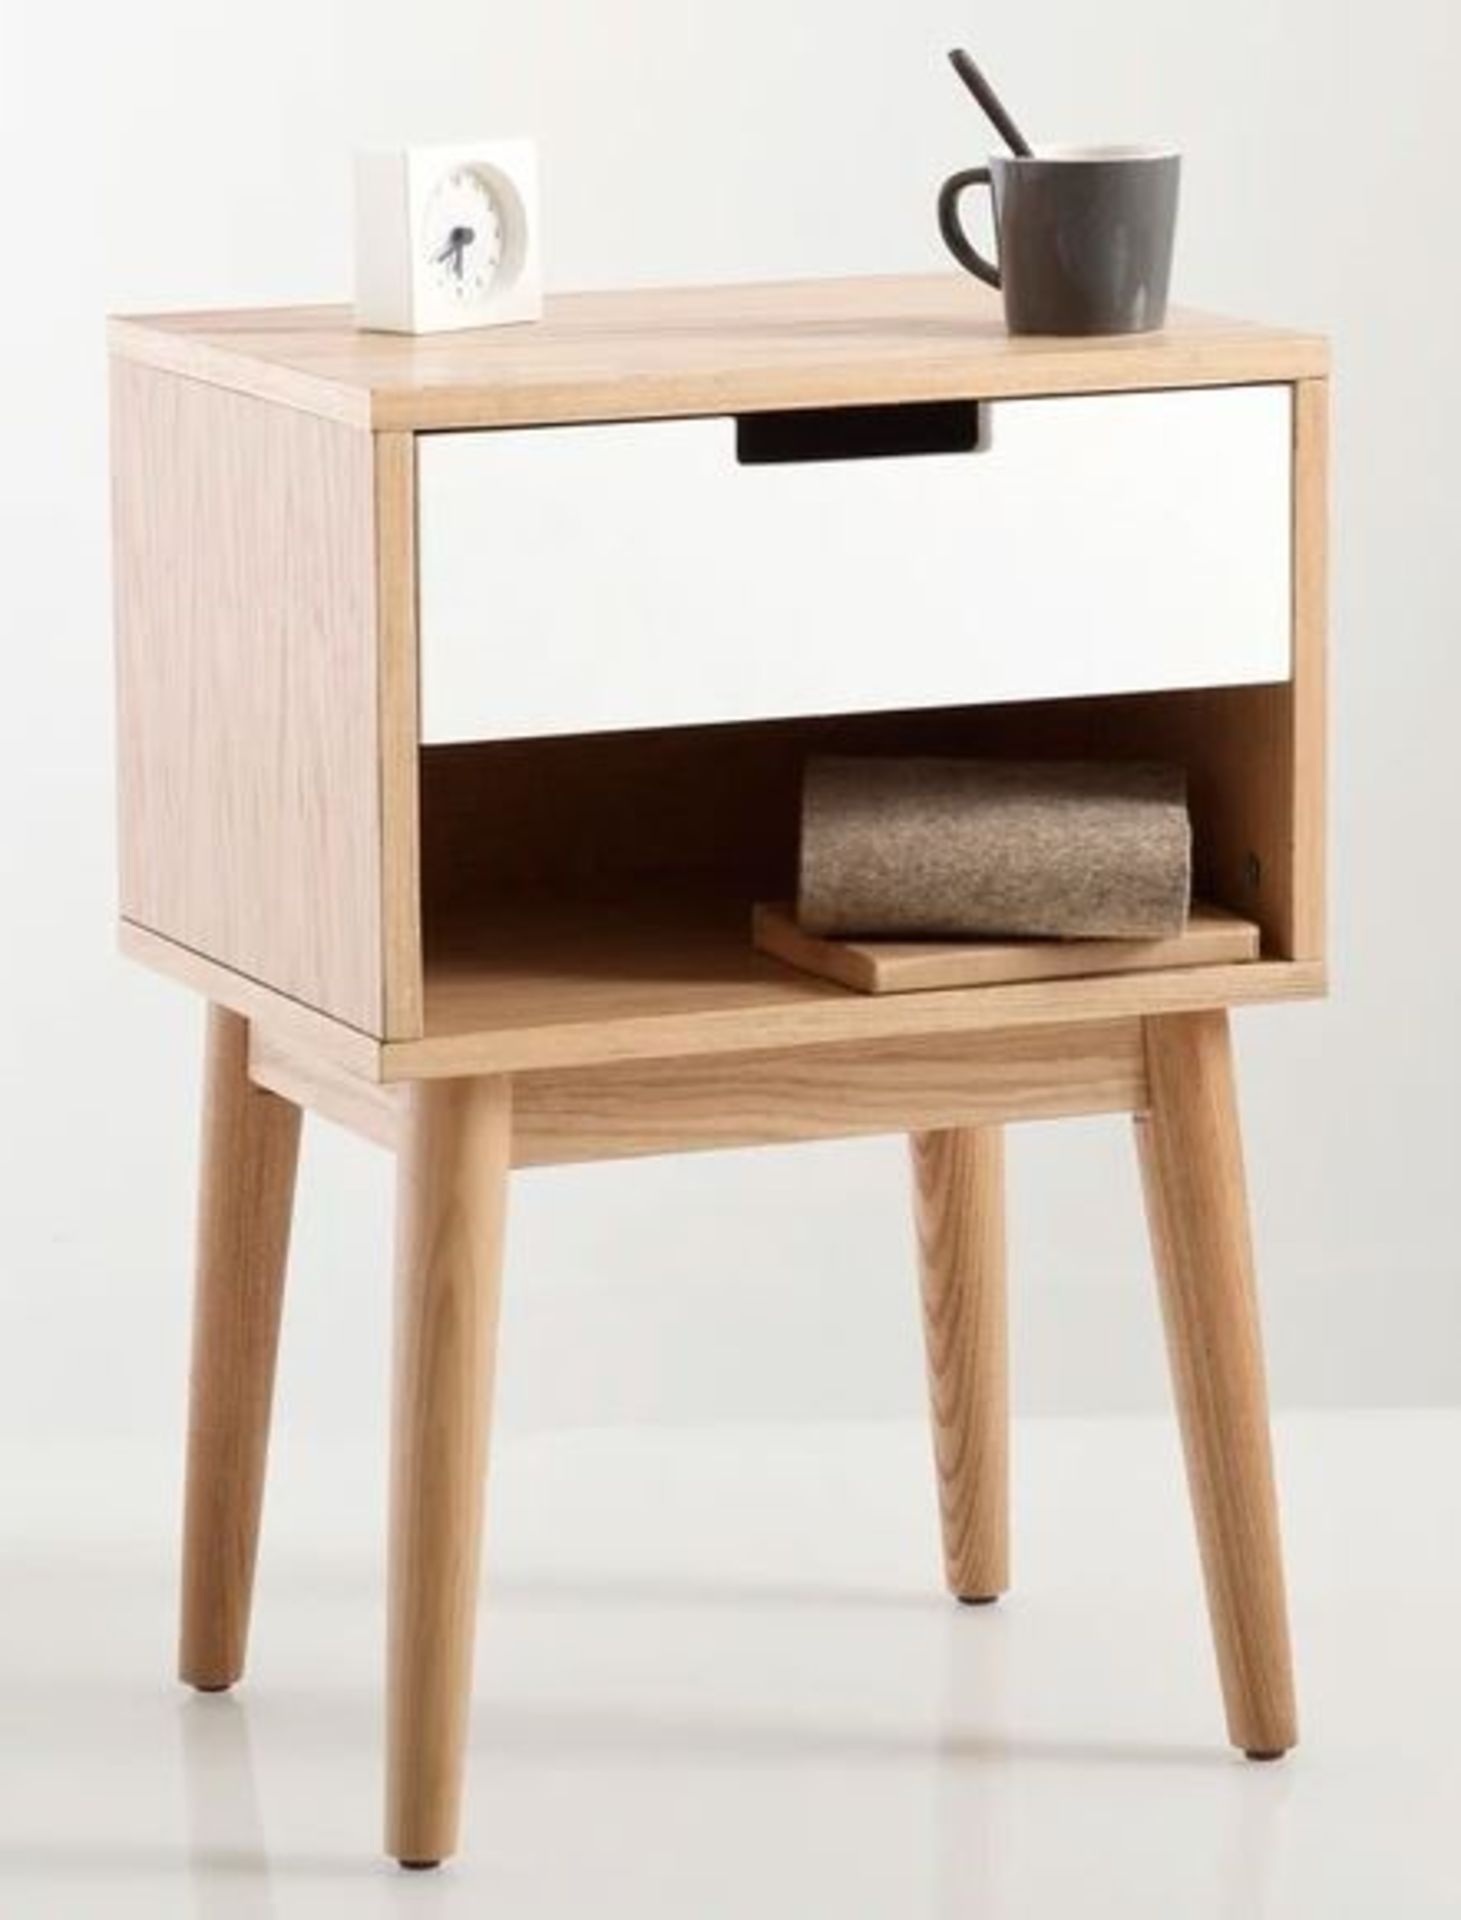 1 GRADE B BOXED DESIGNER JIMI VINTAGE STYLE BEDSIDE CABINET IN WHITE AND WOOD / RRP £135.00 (